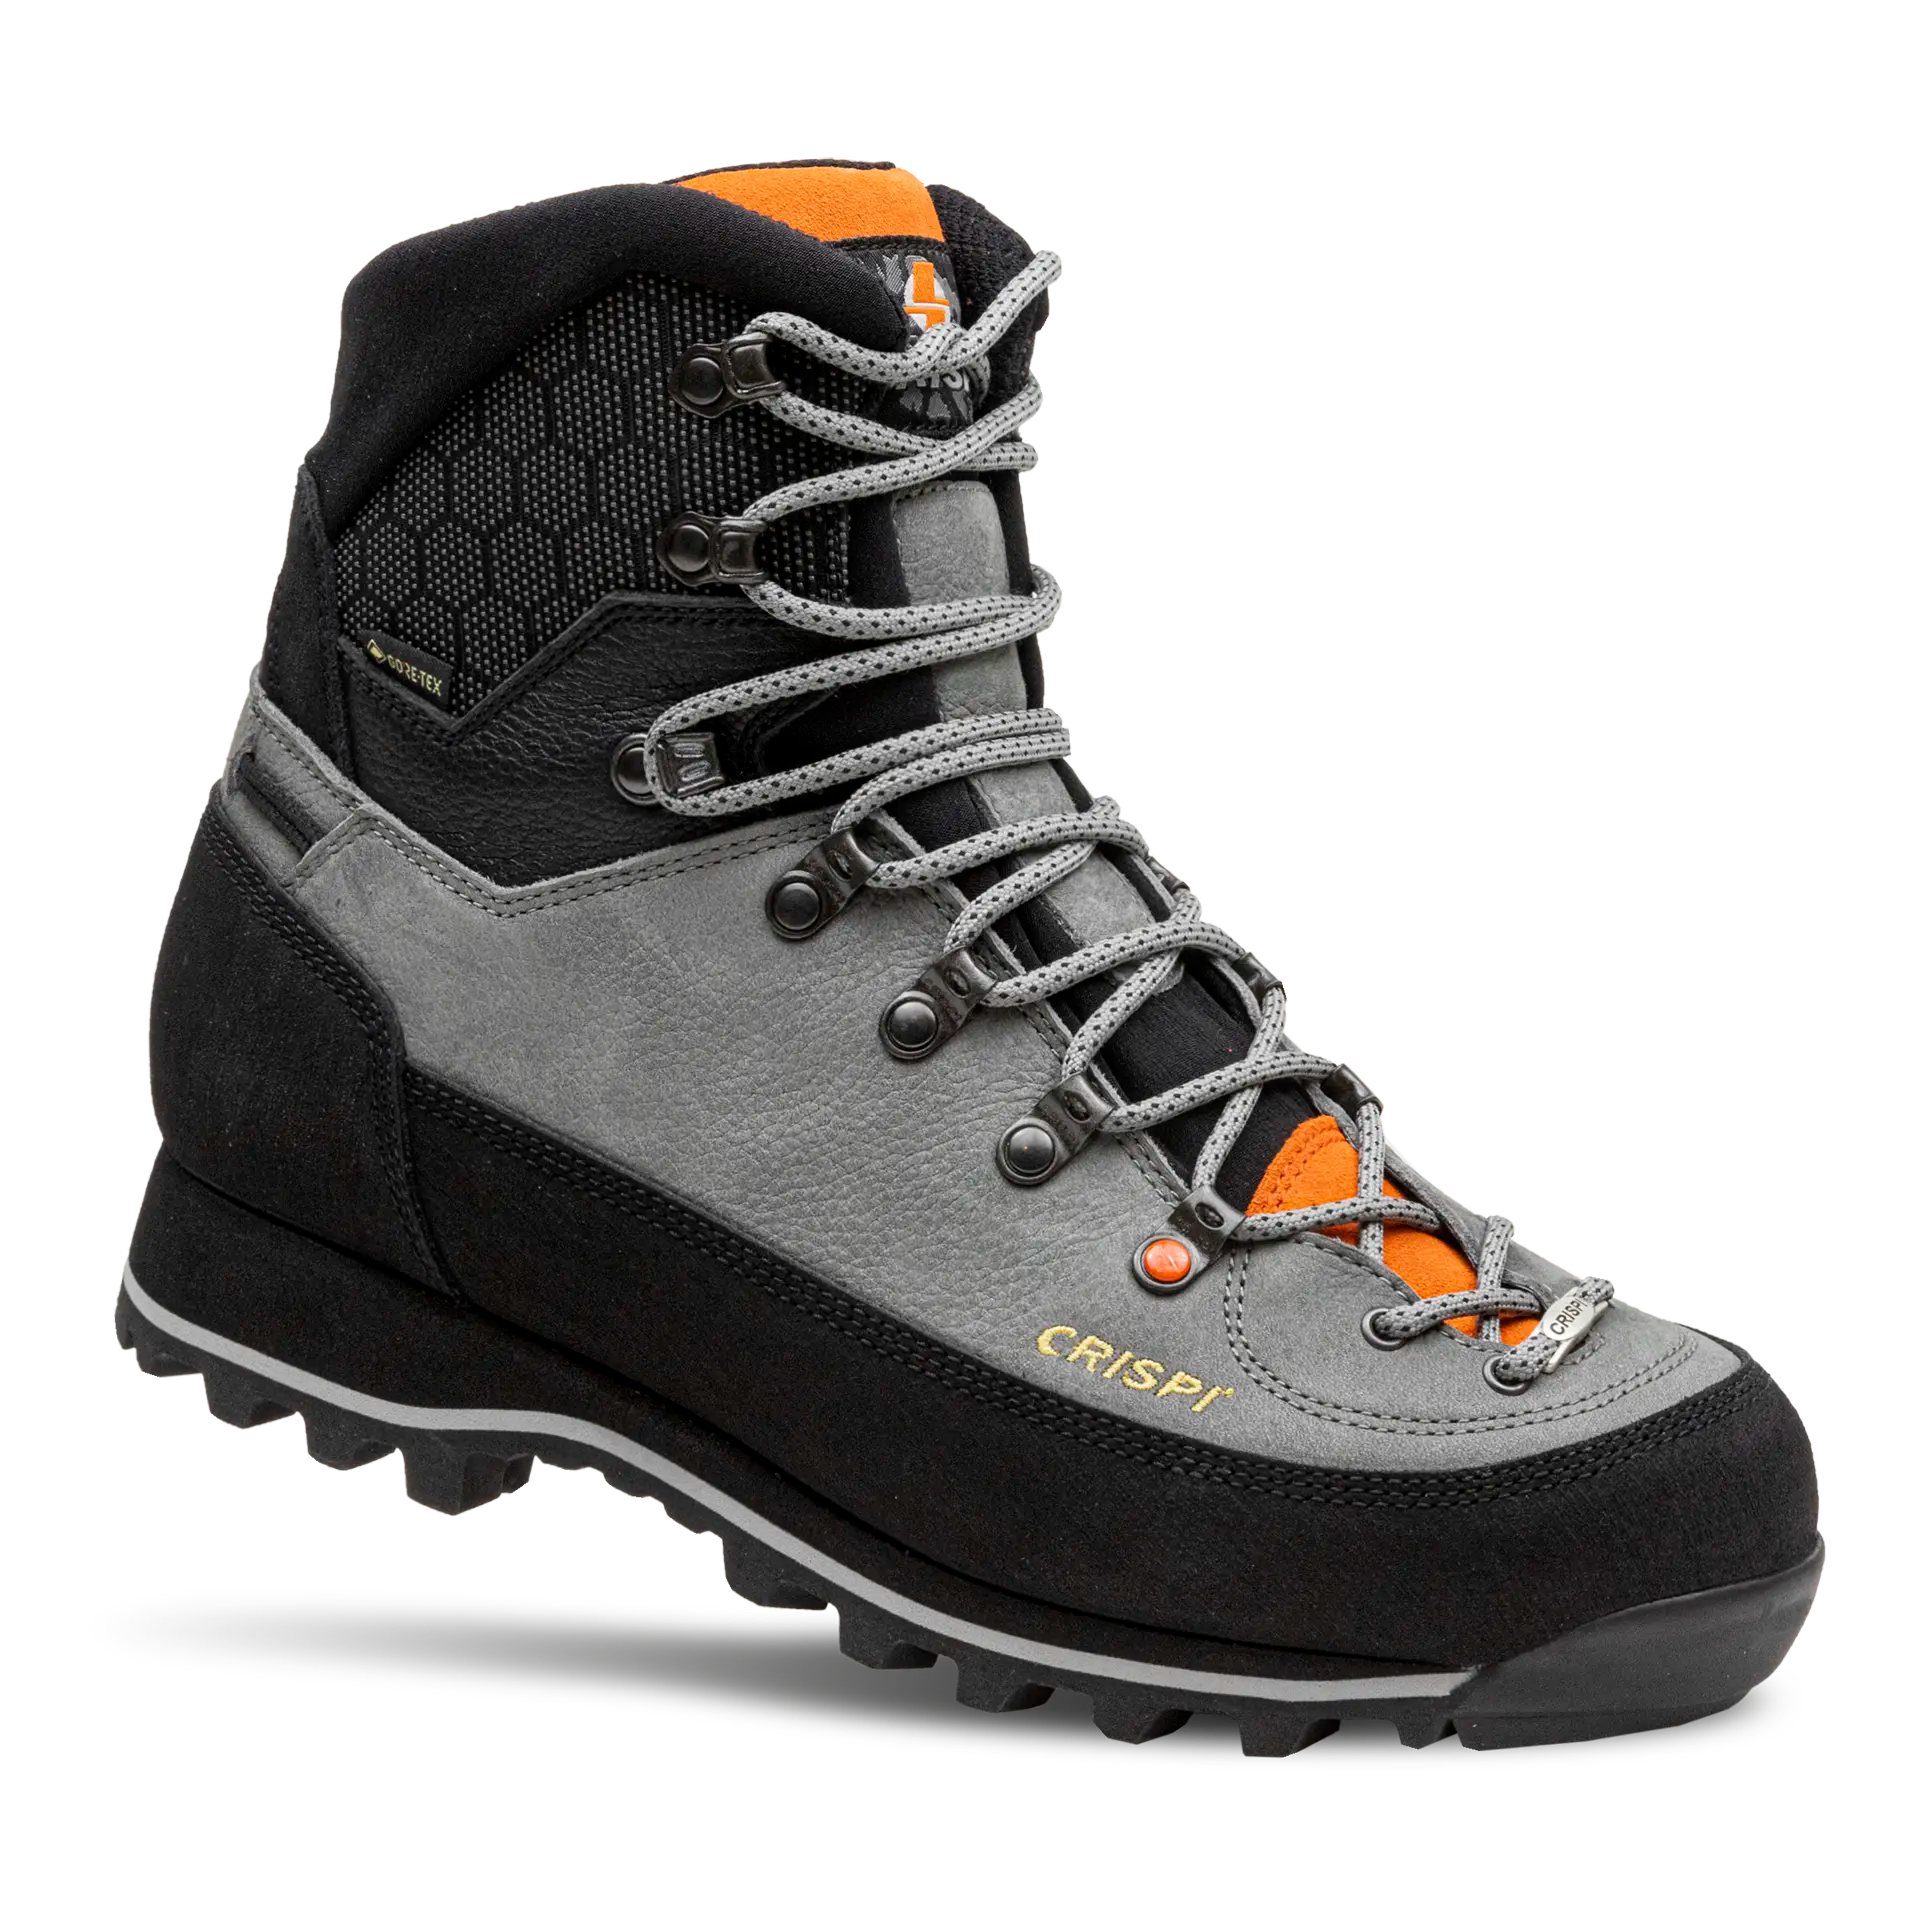 Crispi Lapponia III GTX Non-Insulated Hunting Boots